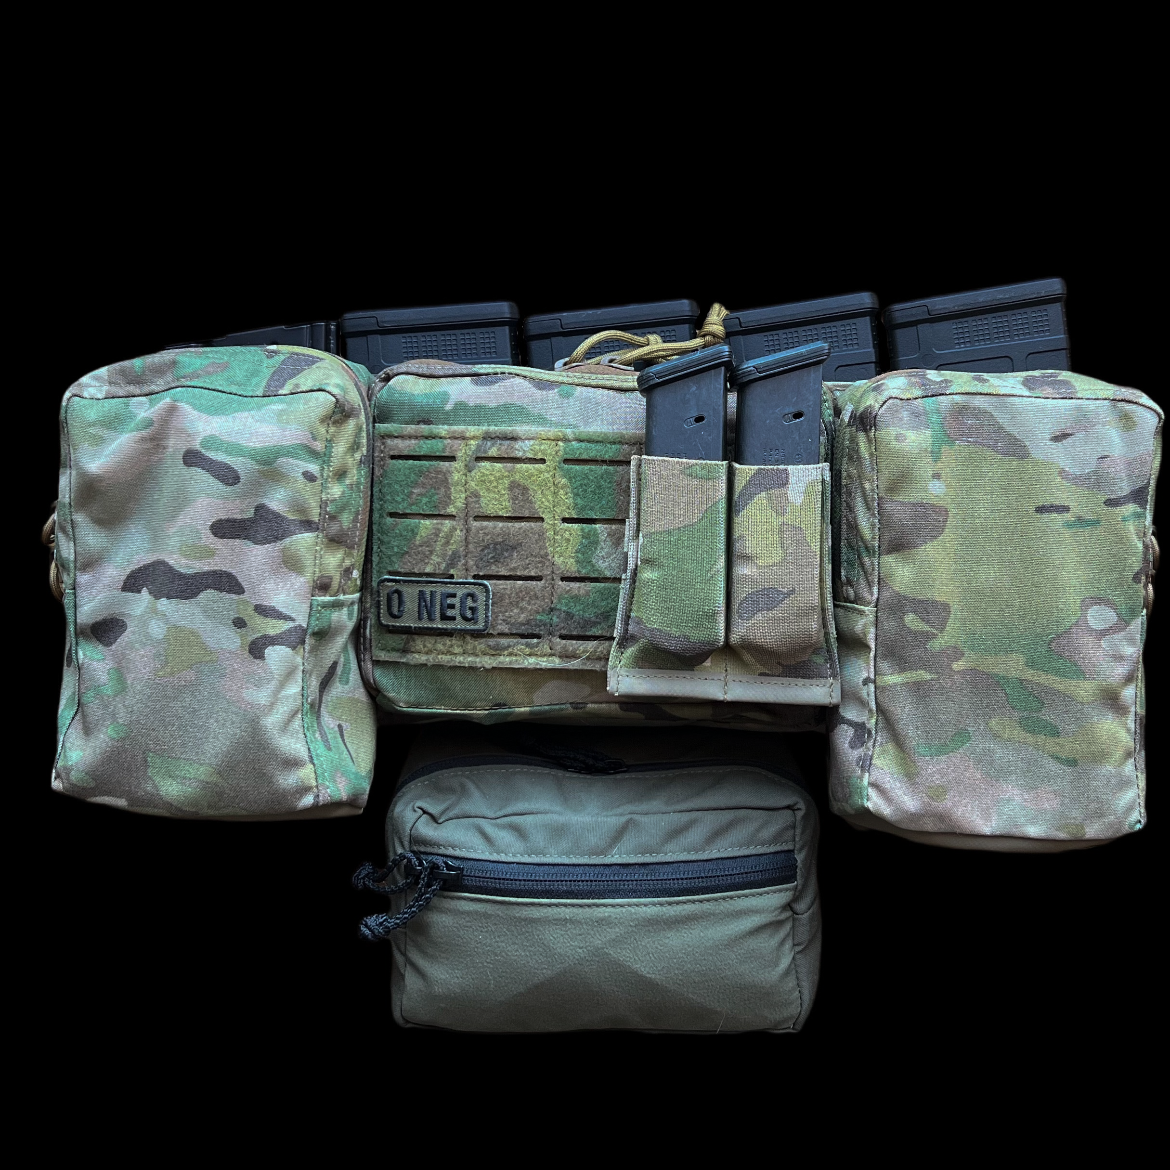 MCRS - Recon Chest Rig Split Front - Size 16 (A) – TardigradeTactical